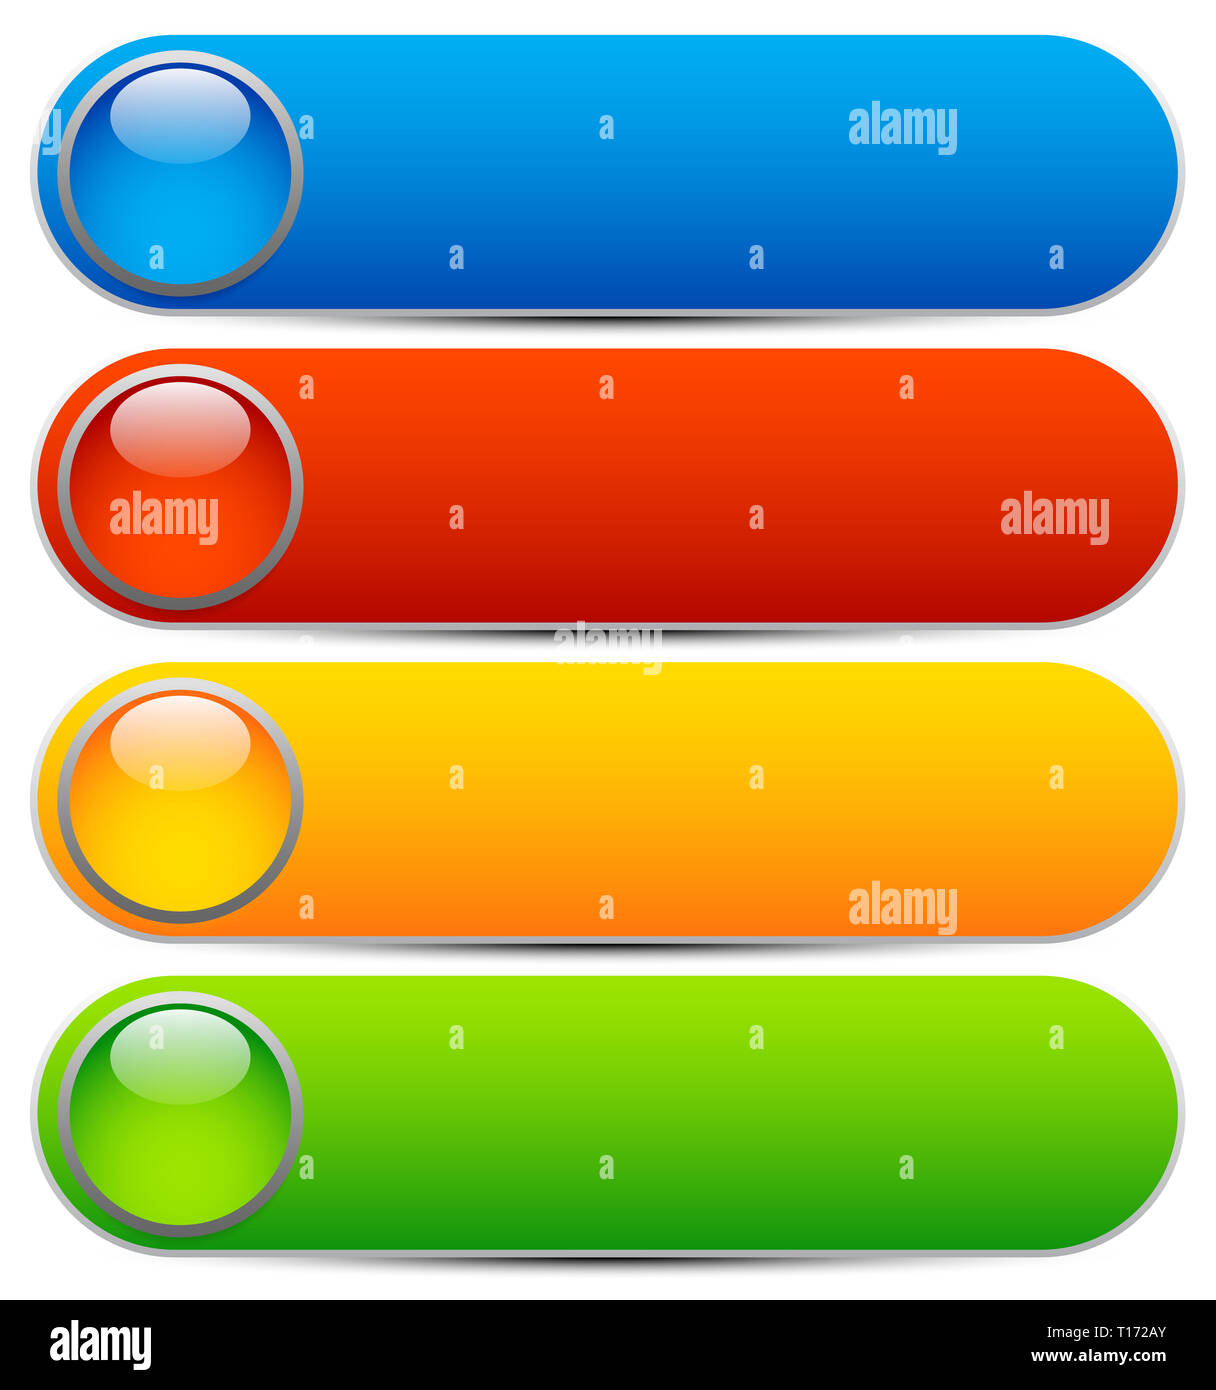 https://c8.alamy.com/comp/T172AY/glossy-buttons-banners-rounded-rectangle-shapes-colorful-vector-design-elements-blank-buttons-bright-vector-template-webdesign-element-T172AY.jpg